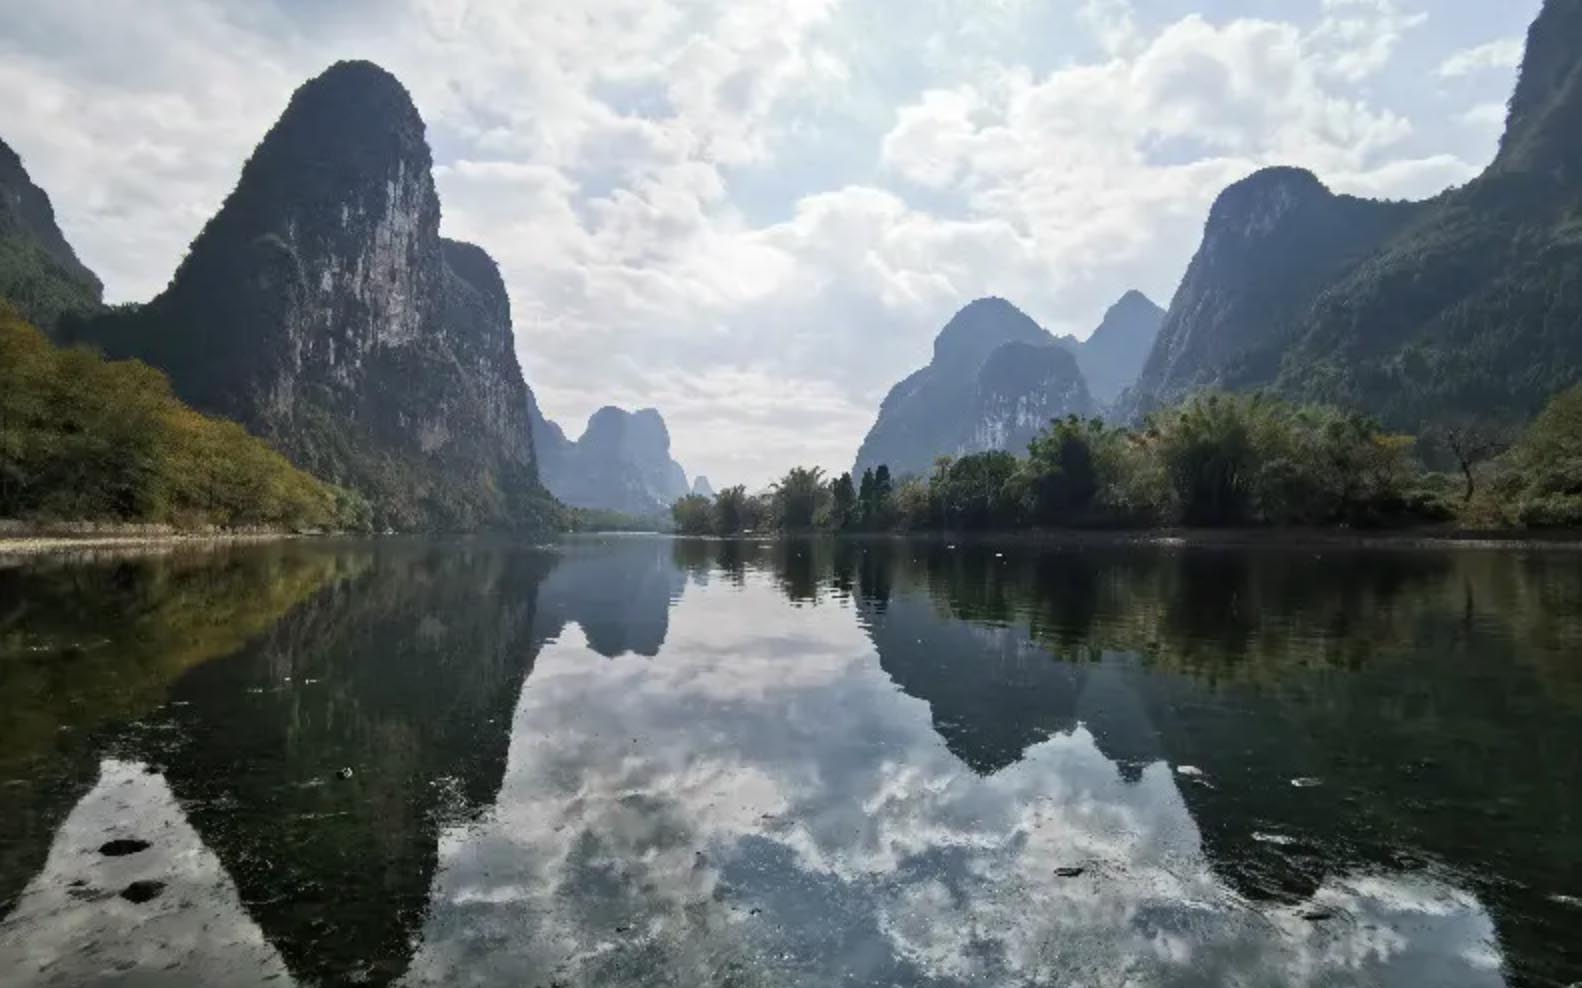 <p><span><span><span><span><span><span>The Li River in Guilin, China, looks like it was plucked from a traditional Chinese painting. The iconic karst peaks rise majestically from the waters, creating a landscape that has inspired poets and artists for centuries.</span></span></span></span></span></span></p>  <p><span><span><span><span><span><span>A river cruise along the Li River is a journey into another realm. The reflections of the limestone peaks in the tranquil waters, shrouded in mist during the early morning or bathed in the warm glow of the setting sun, evoke a sense of timeless serenity. Fishermen on bamboo rafts add a touch of cultural authenticity to the scene.</span></span></span></span></span></span></p>  <p><span><span><span><span><span><span>The scenic beauty of the Li River has made it a symbol of Guilin's natural wonders. The picturesque landscapes, with names like Elephant Trunk Hill and Nine Horses Fresco Hill, contribute to the area's legendary charm. The Li River in Guilin offers an unforgettable and enchanting experience for those who have the privilege to witness its splendor.</span></span></span></span></span></span></p>